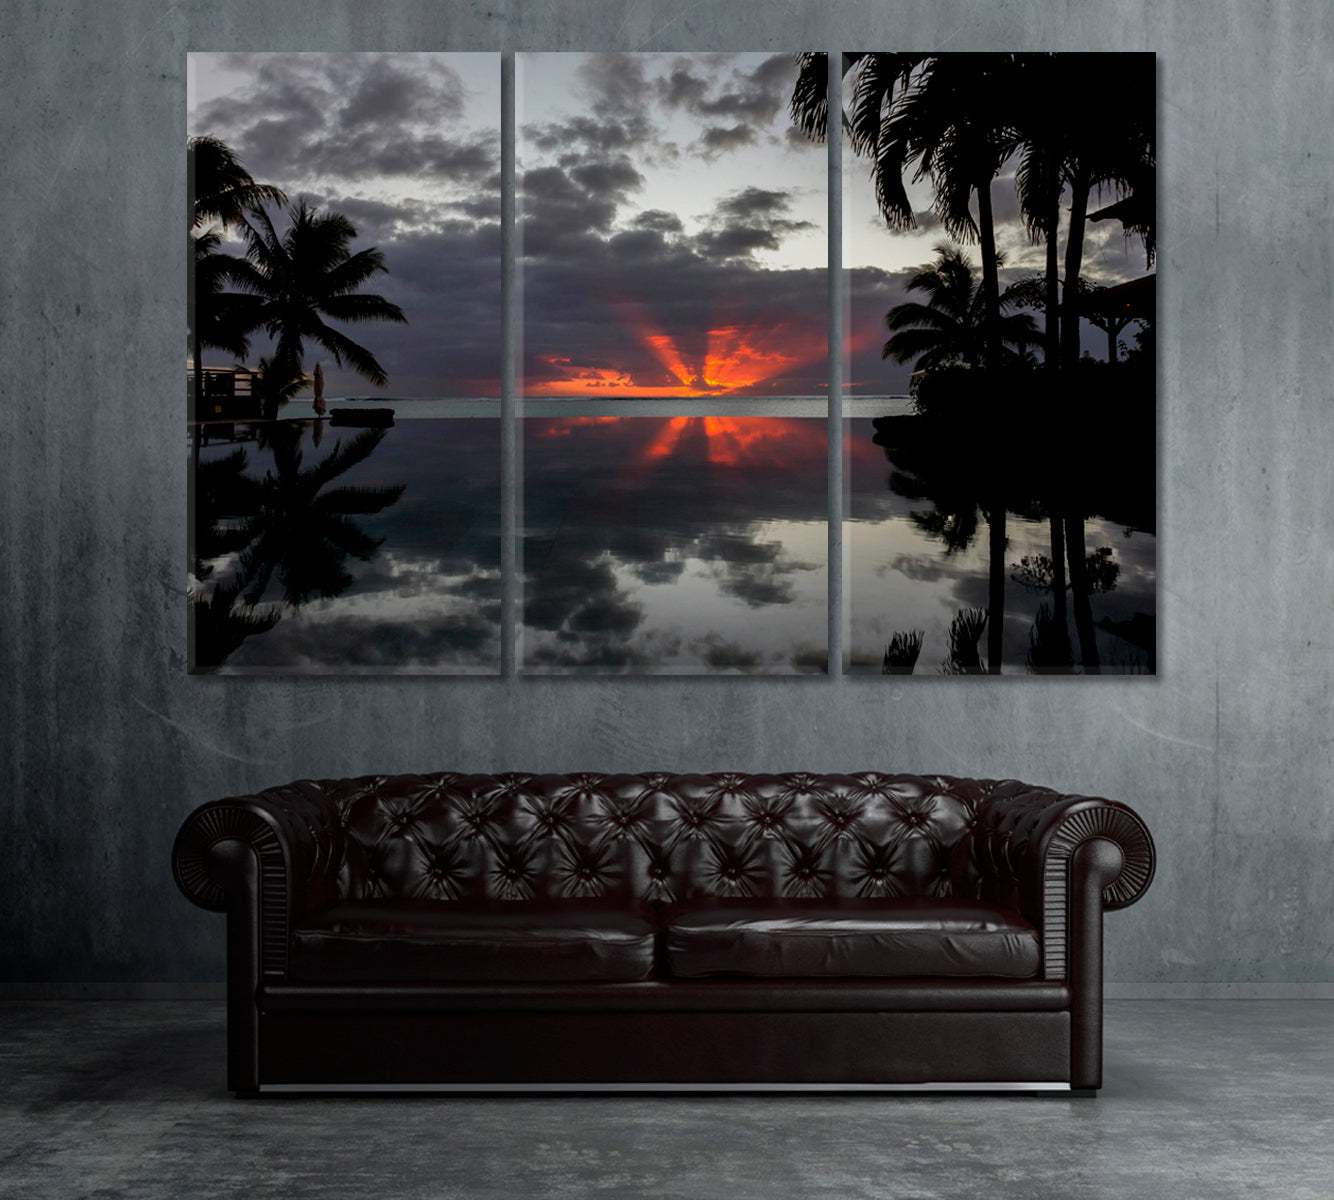 Sunset over Pool Maldives Canvas Print ArtLexy 3 Panels 36"x24" inches 